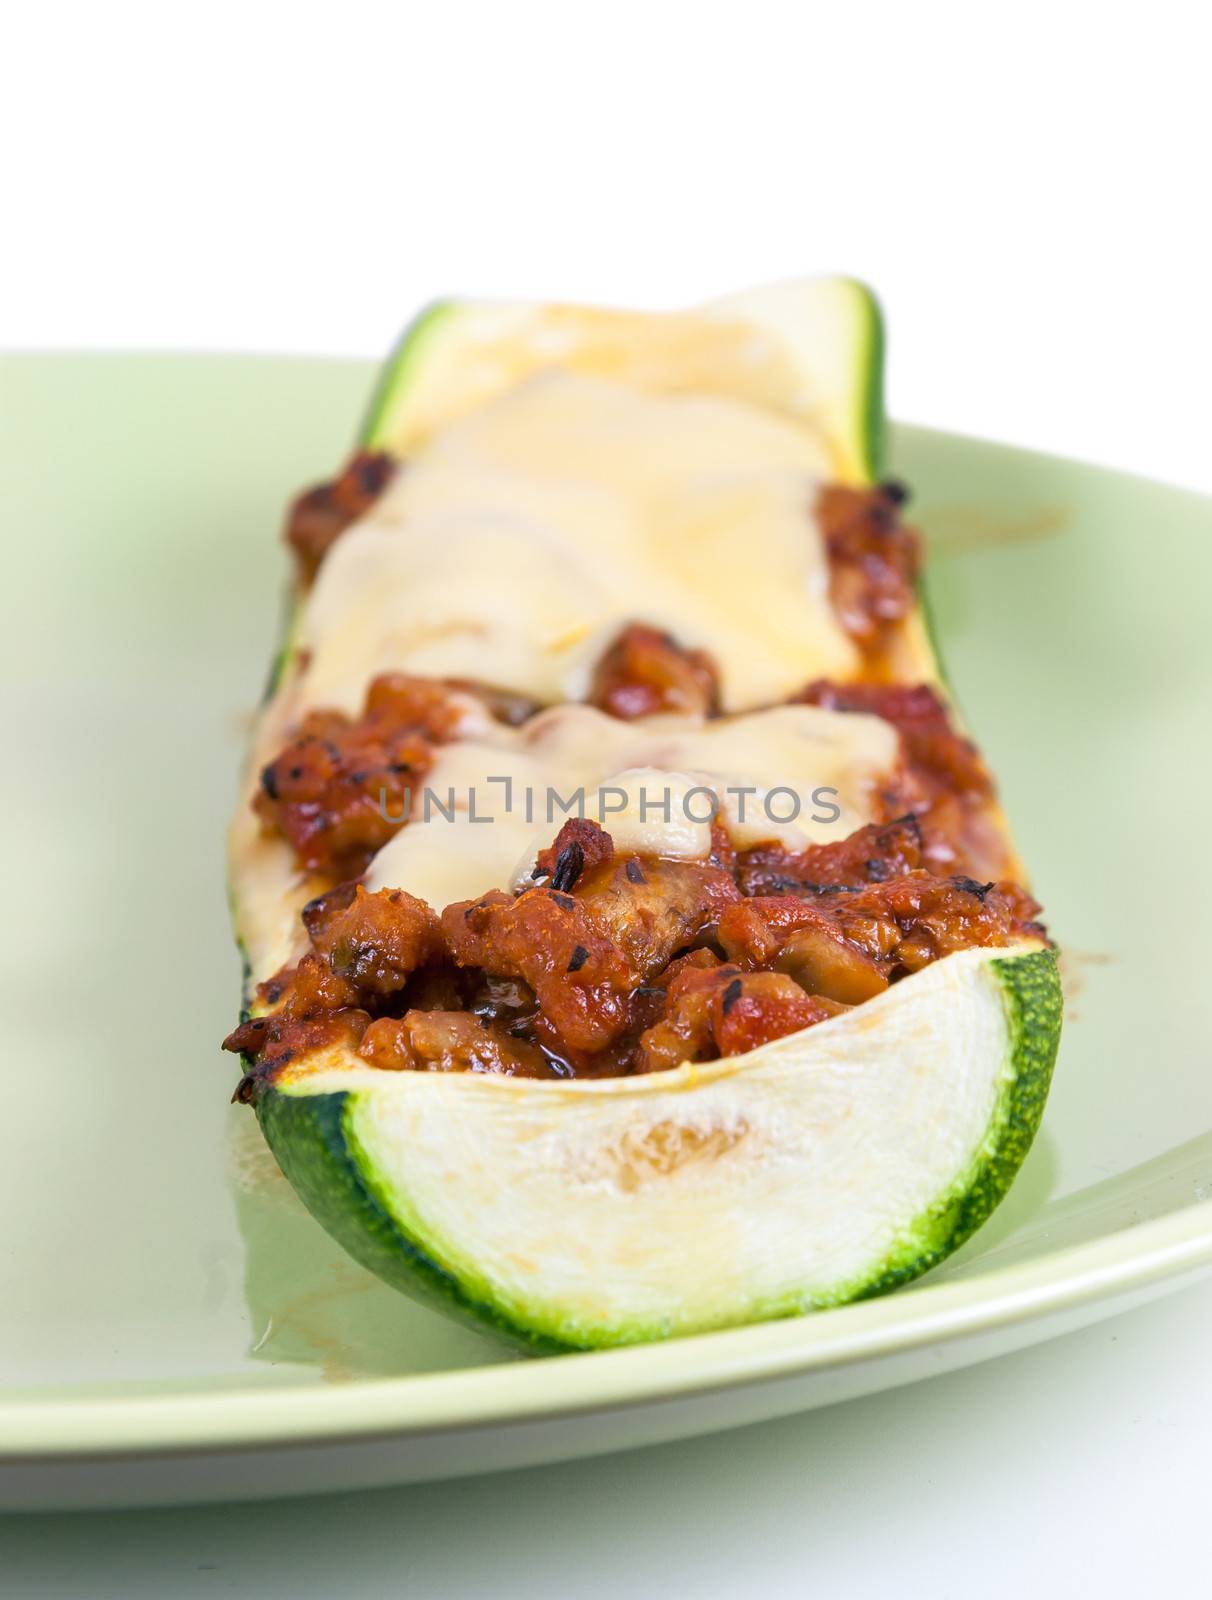 Zucchini stuffed with minced meat and cheese by mkos83